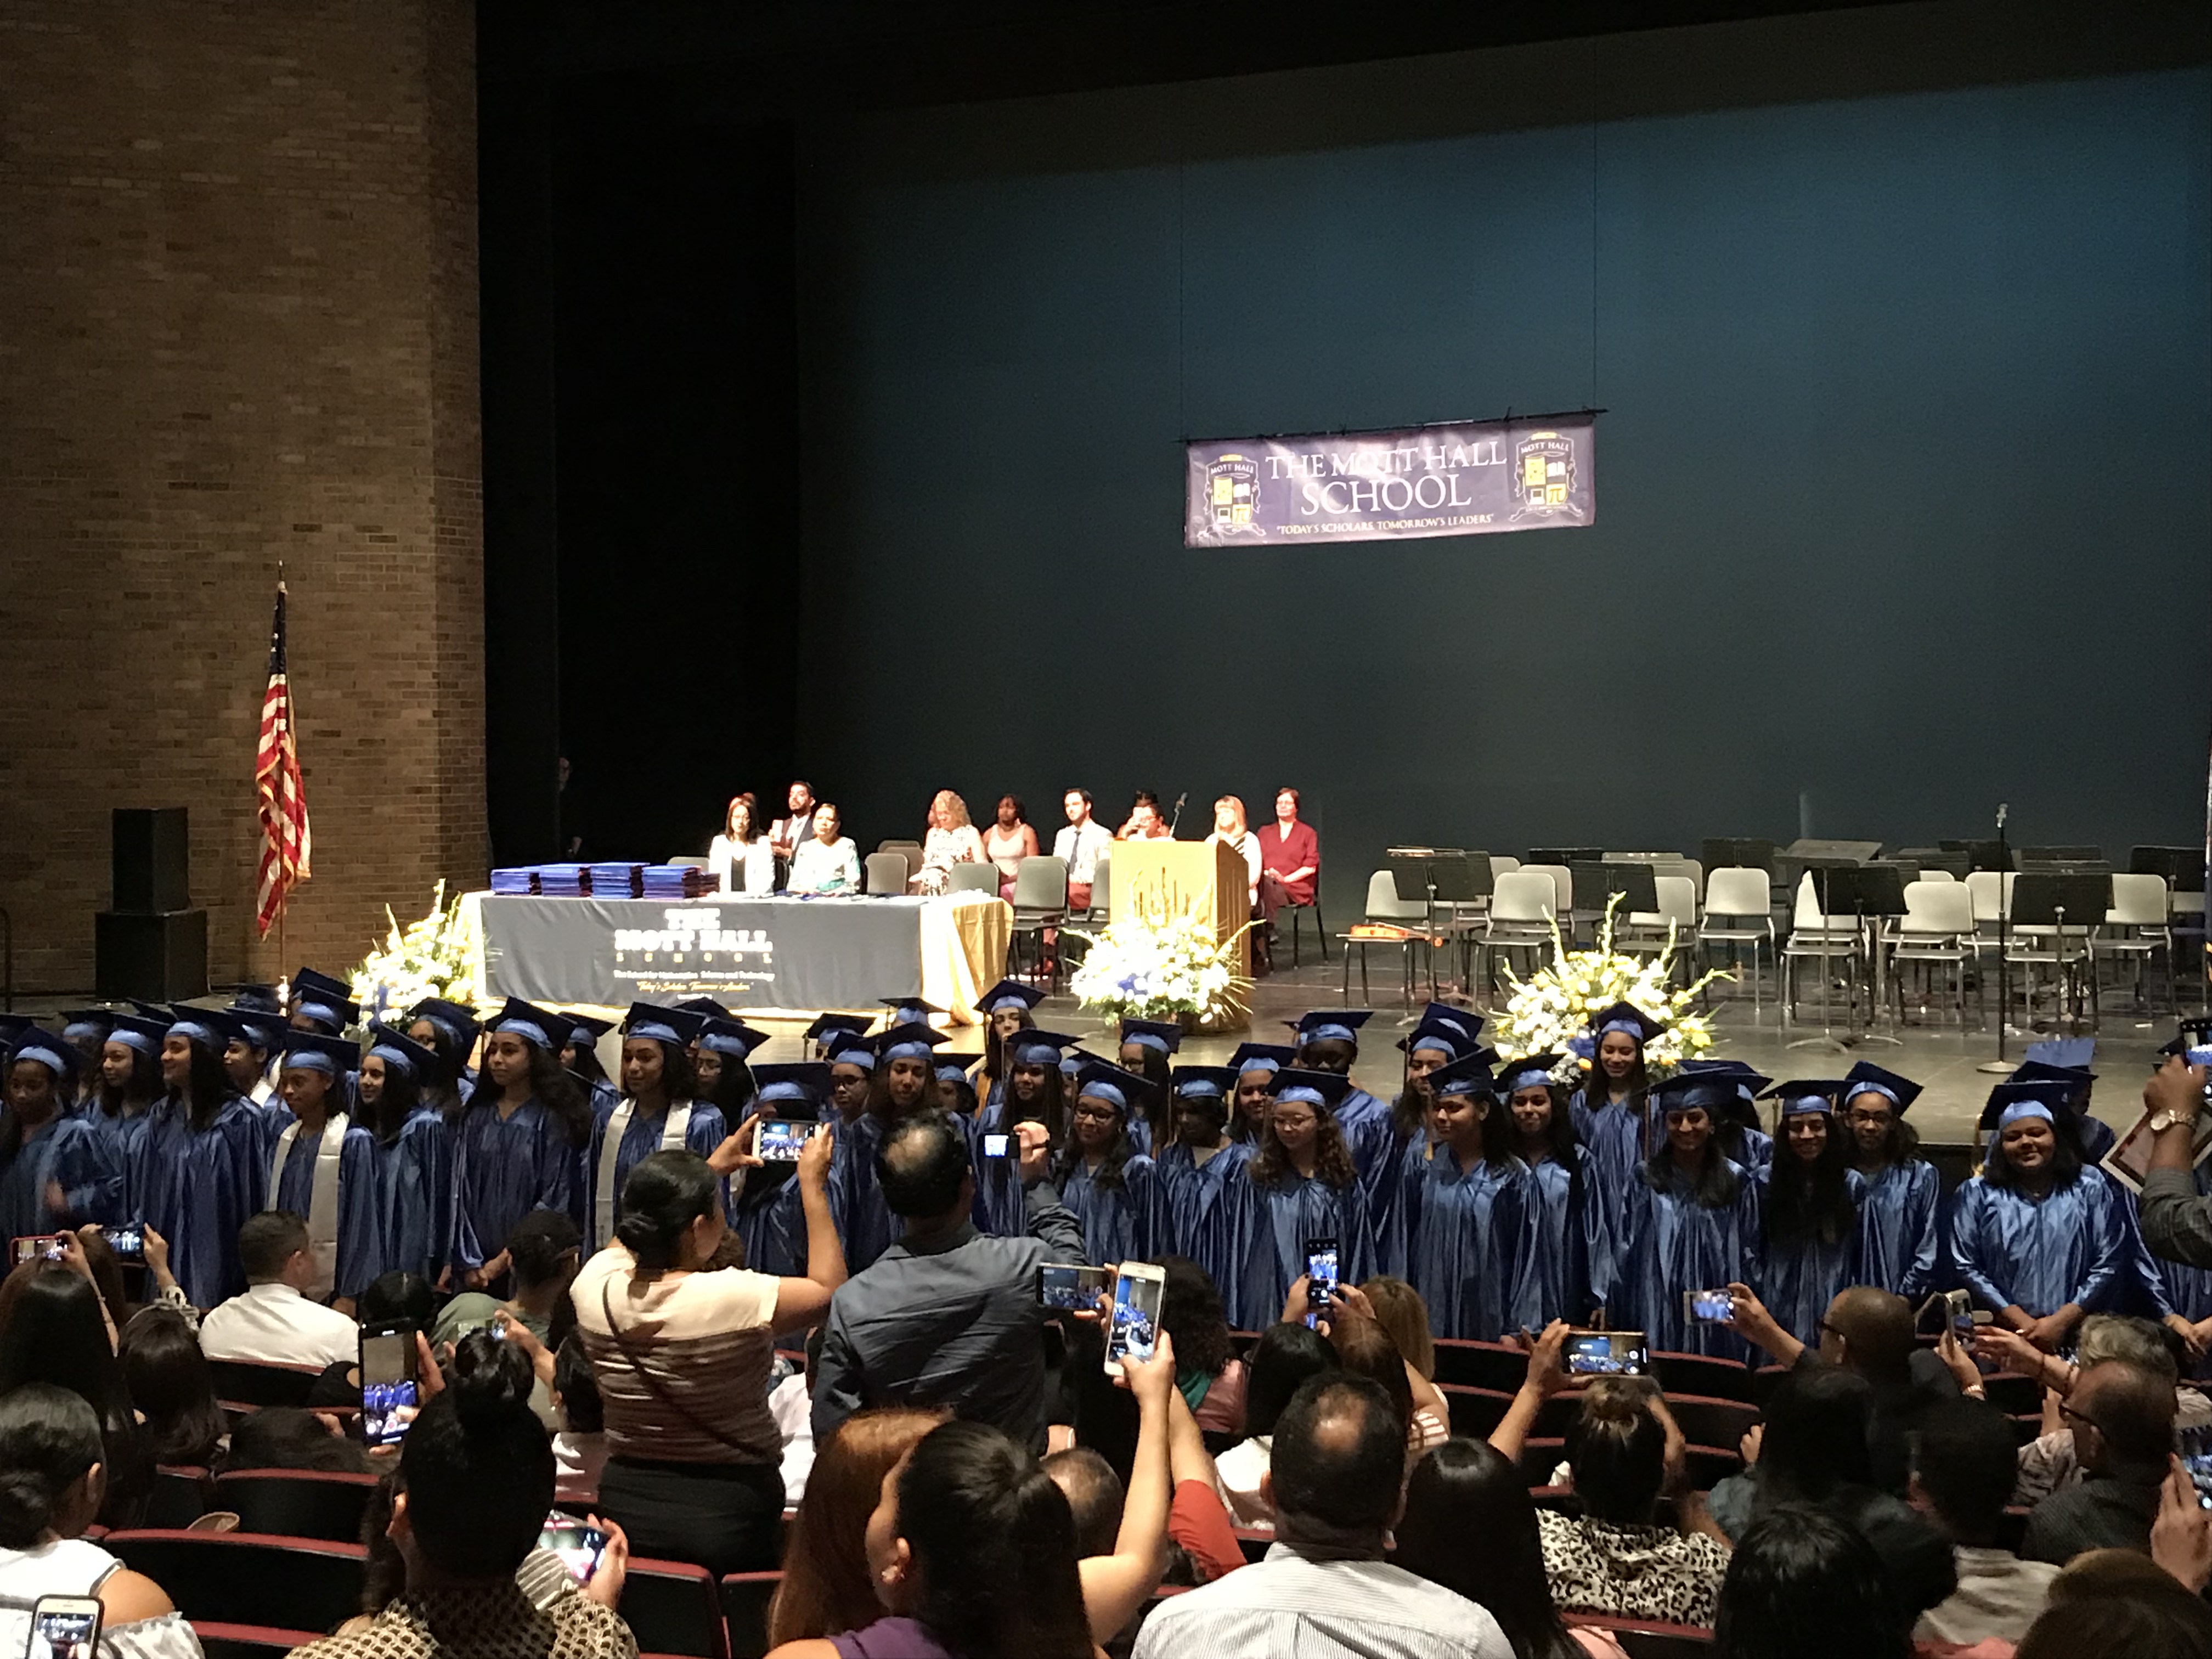 Chancellor Richard Carranza spoke at The Mott Hall School's graduation where he addressed the growing controversy over his agenda.